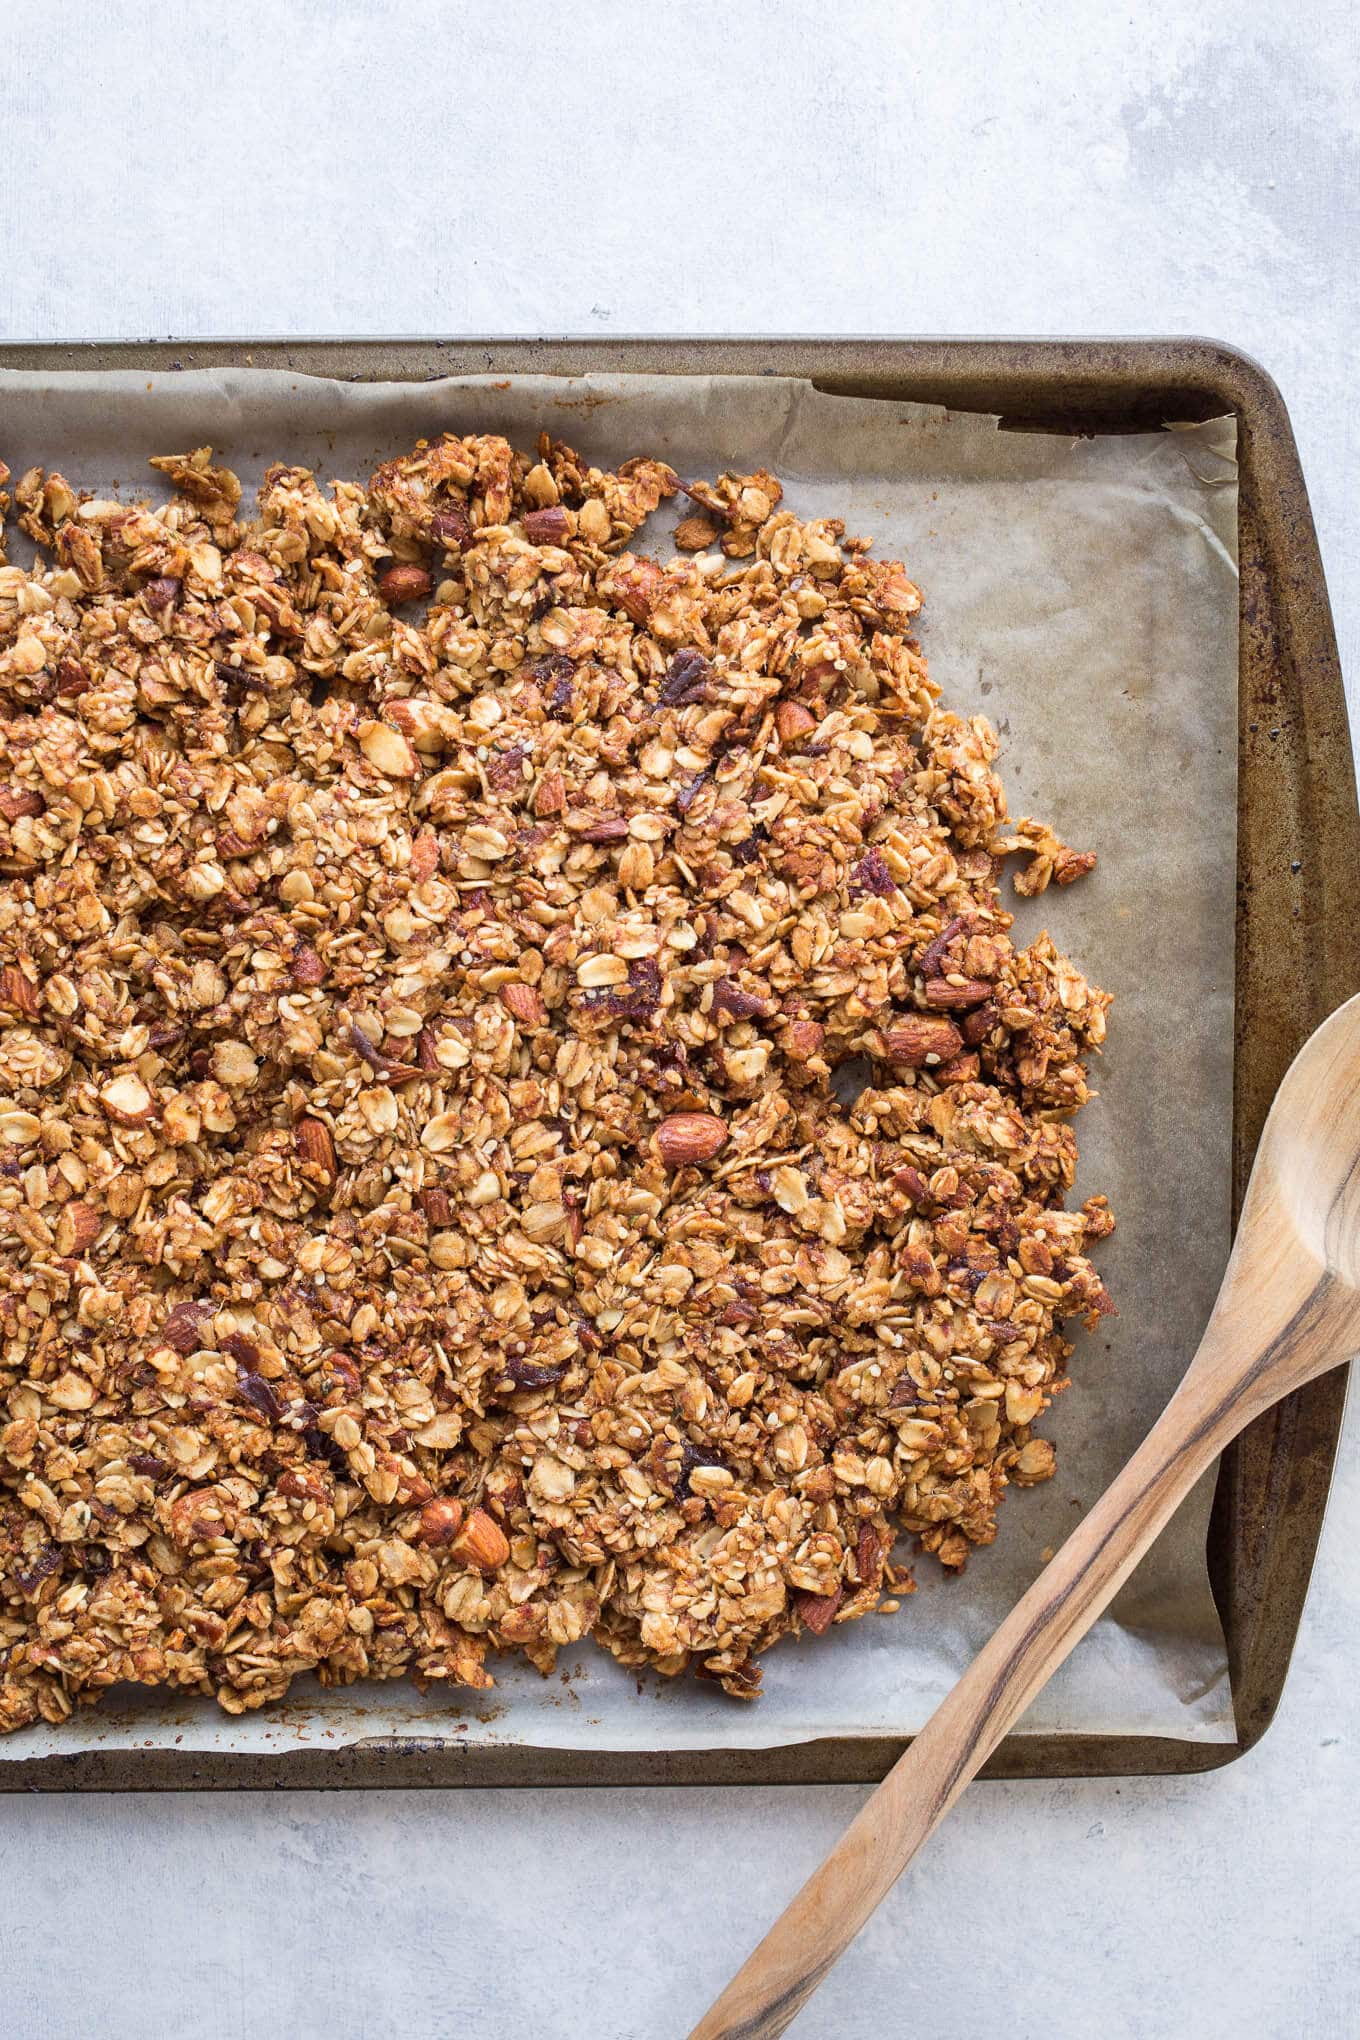 An easy Maple Date Granola recipe that will have you coming back for more. Naturally sweetened with maple syrup and Medjool dates and loaded with gluten-free oats, almonds, hemp seeds, and flaxseeds. Gluten-free and vegan.